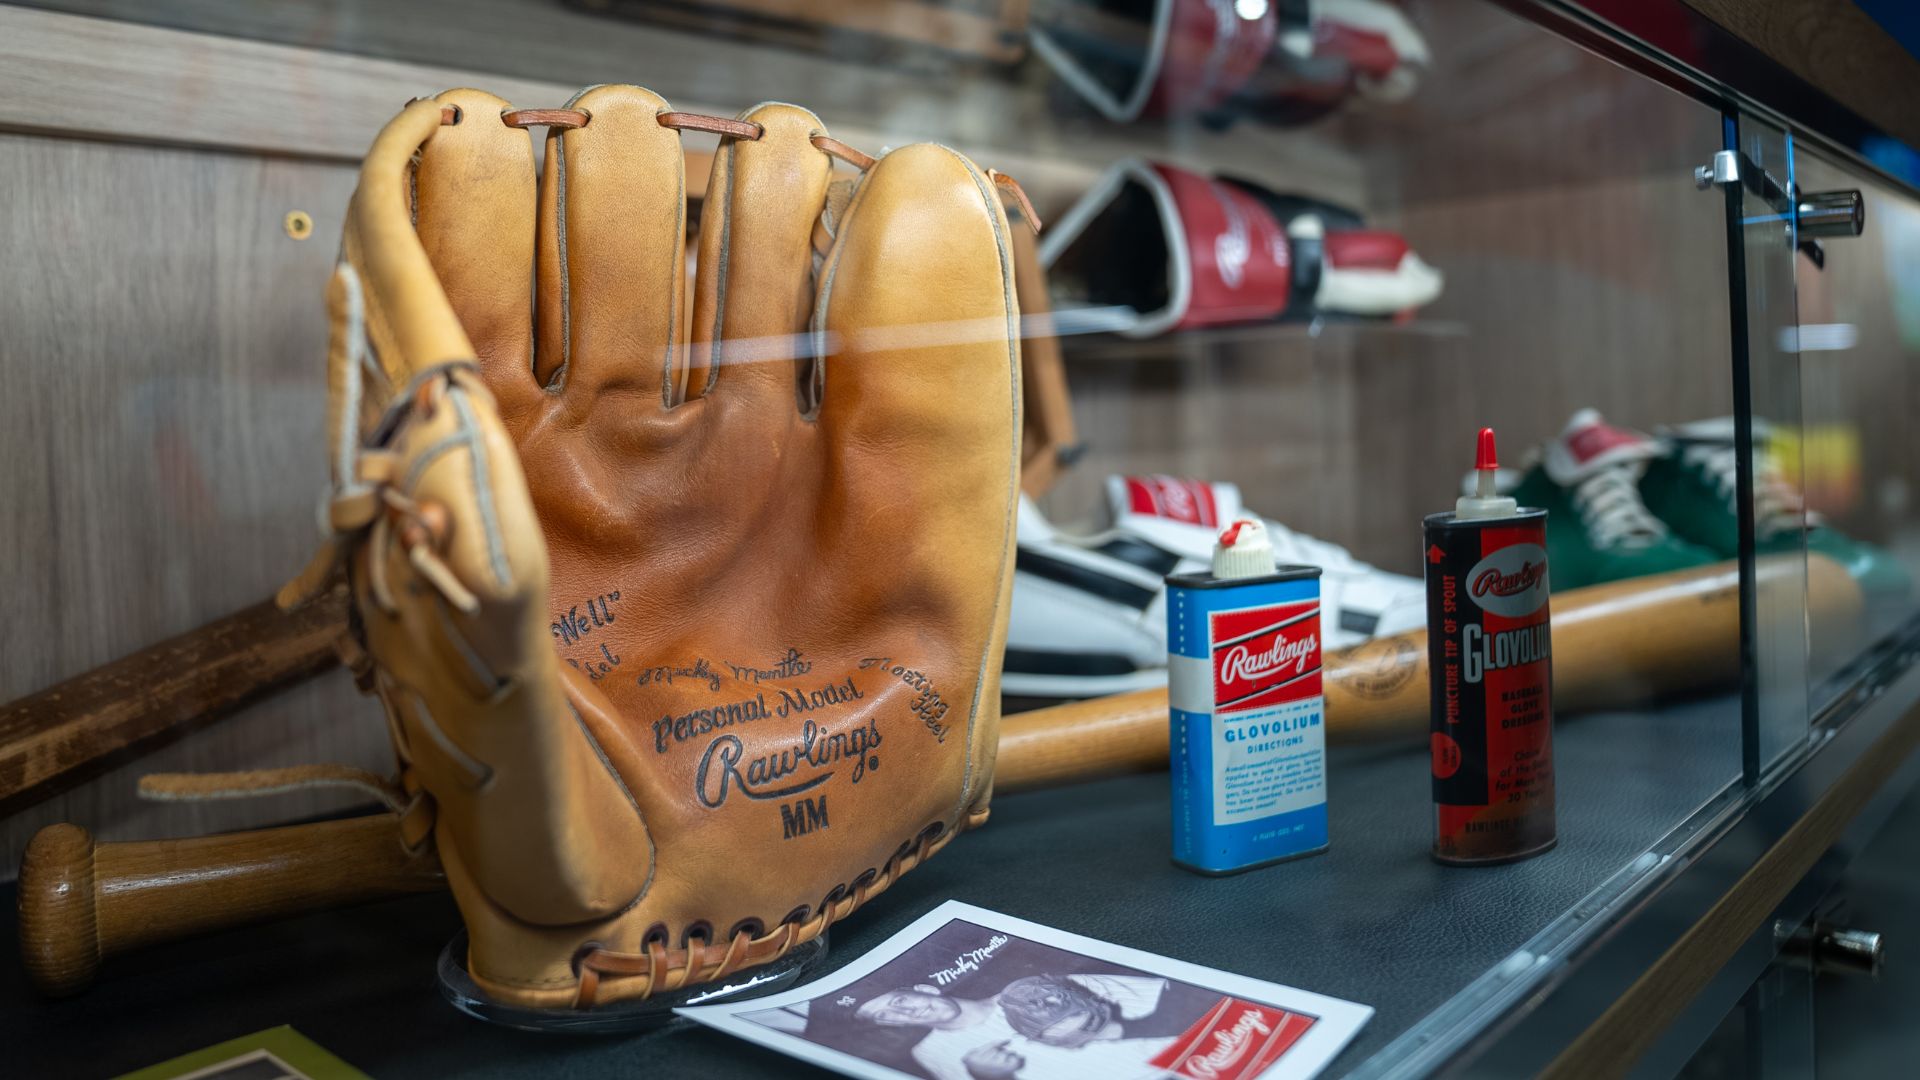 The Rawlings Experience features baseball memorabilia and archival objects.